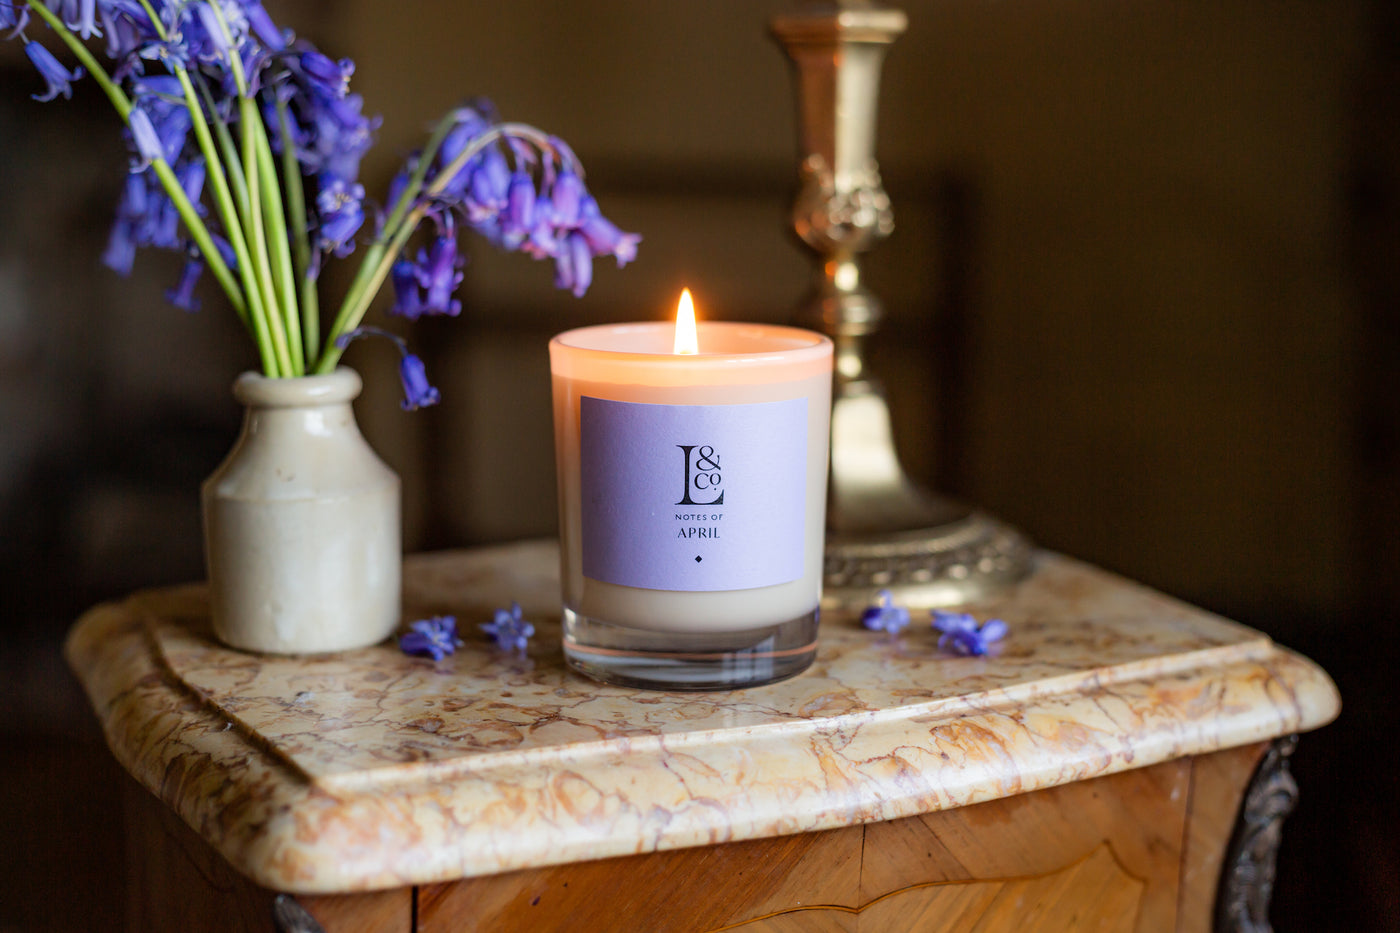 Luxury bluebell candle made in England. Wonderfully fragrant to fill your home with the scent of spring. Free UK delivery.